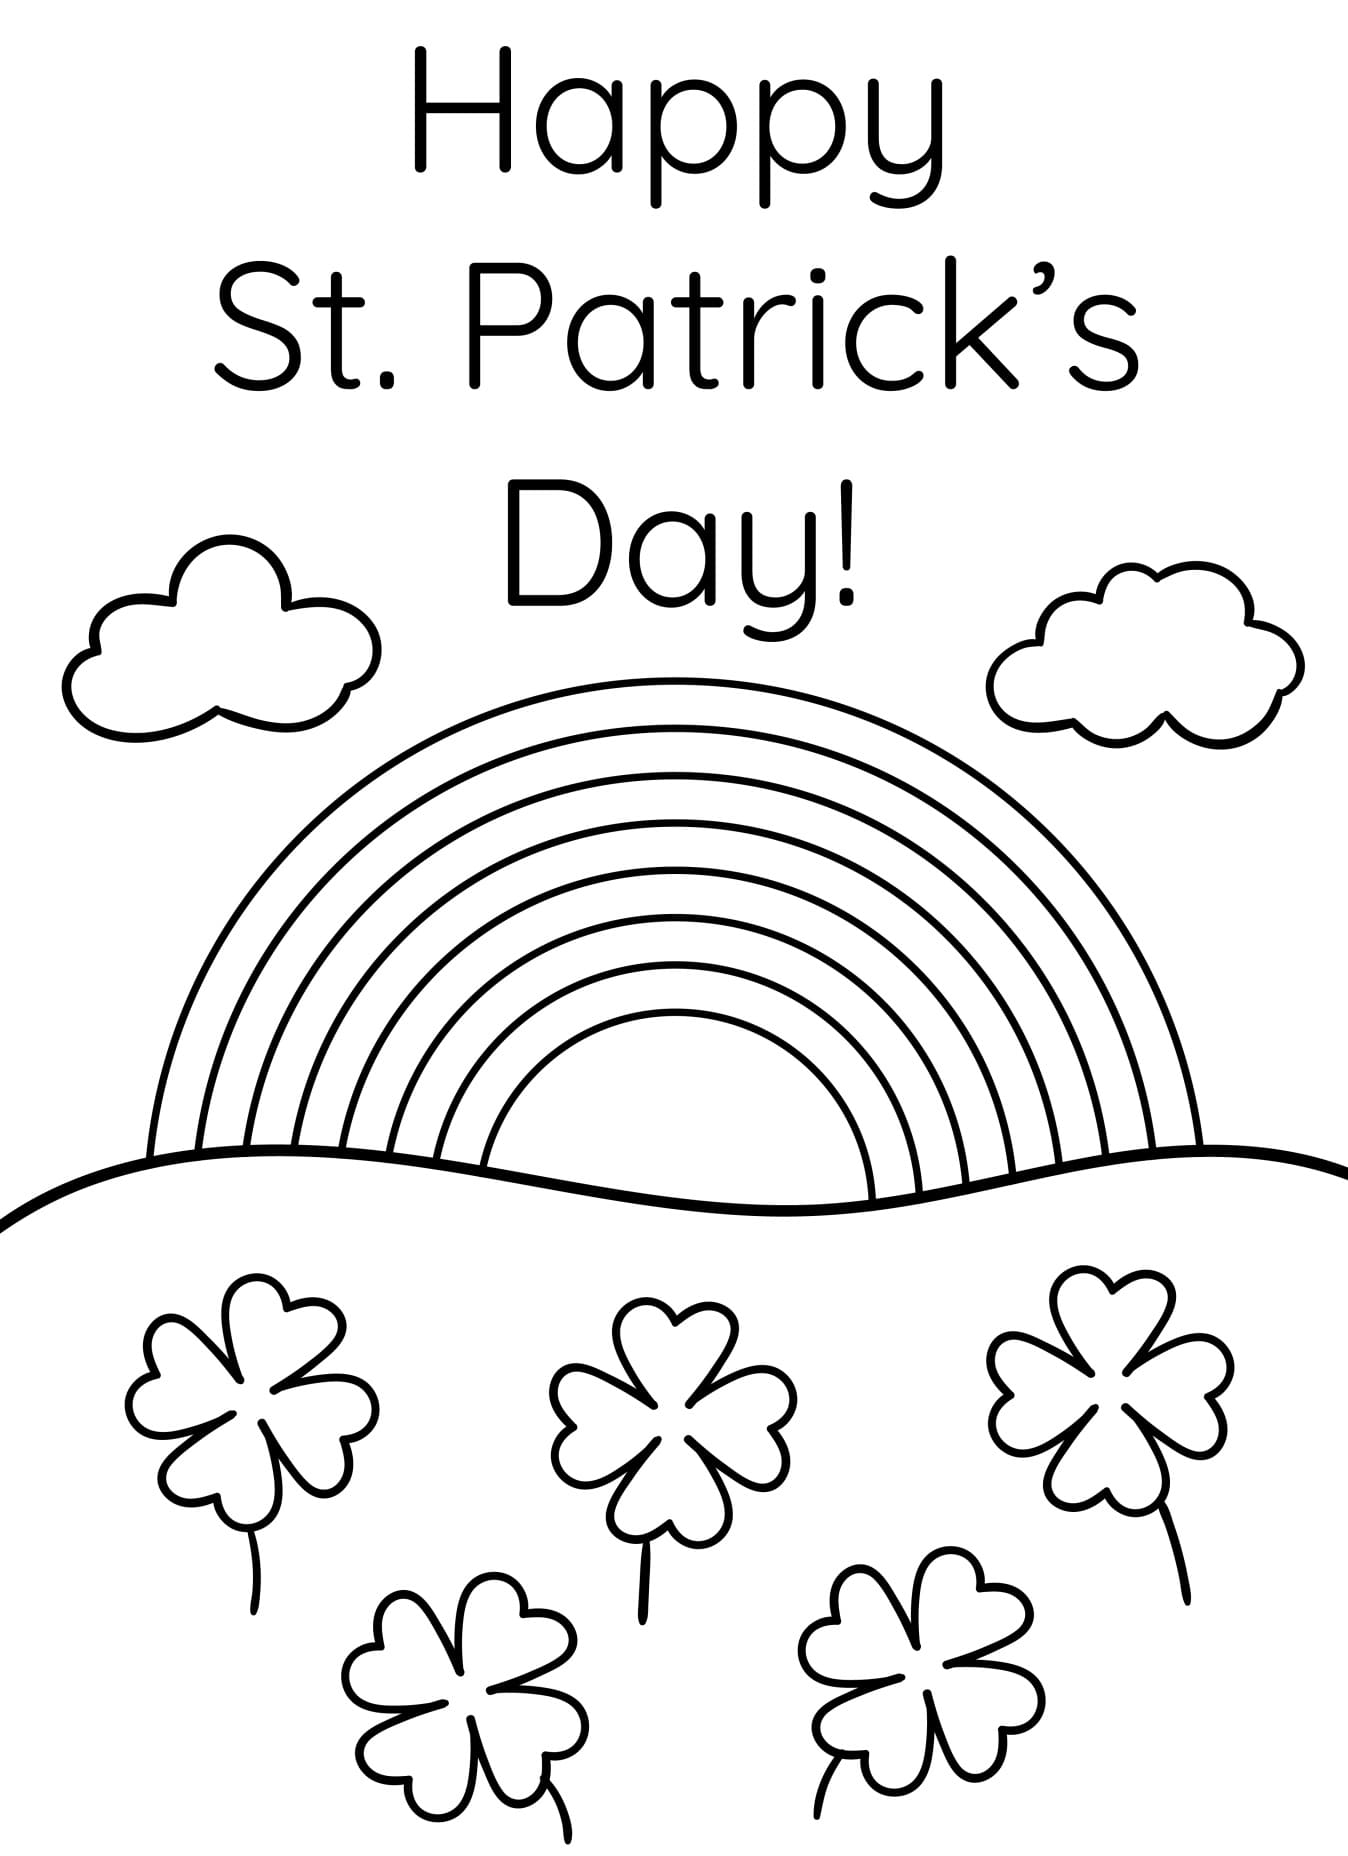 Free Happy St. Patrick's Day Coloring Page Free Printable Coloring